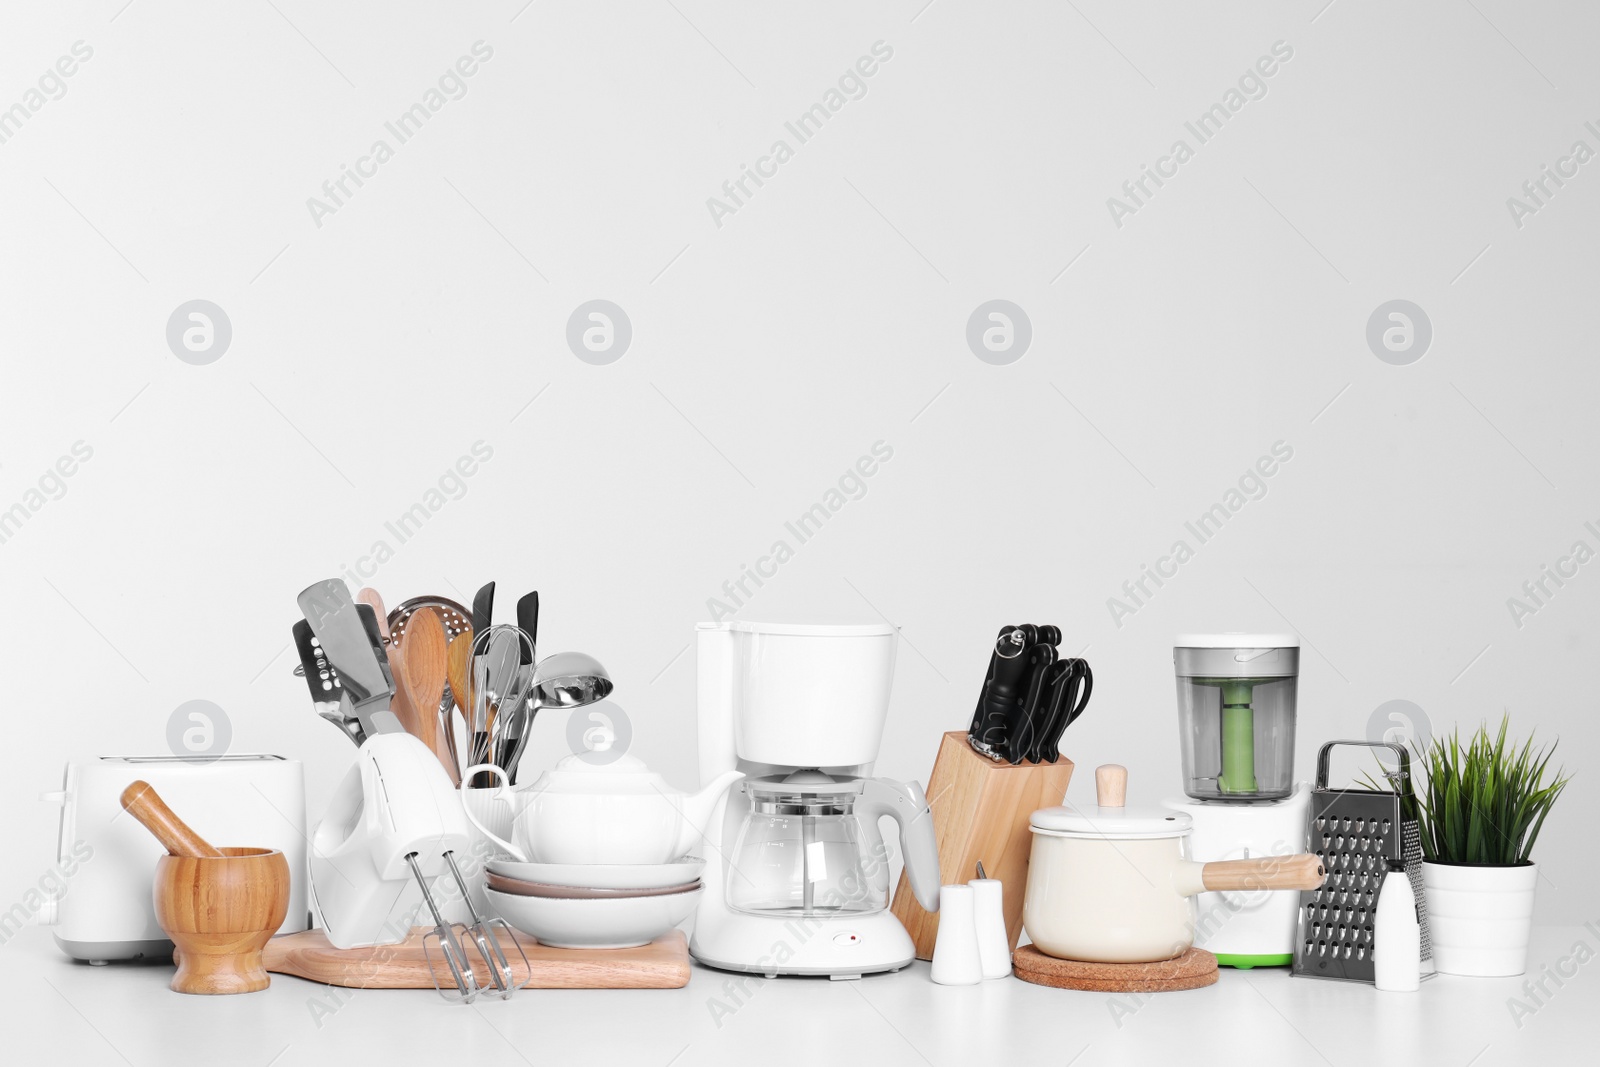 Photo of Set of clean cookware, dishes, utensils and appliances isolated on white